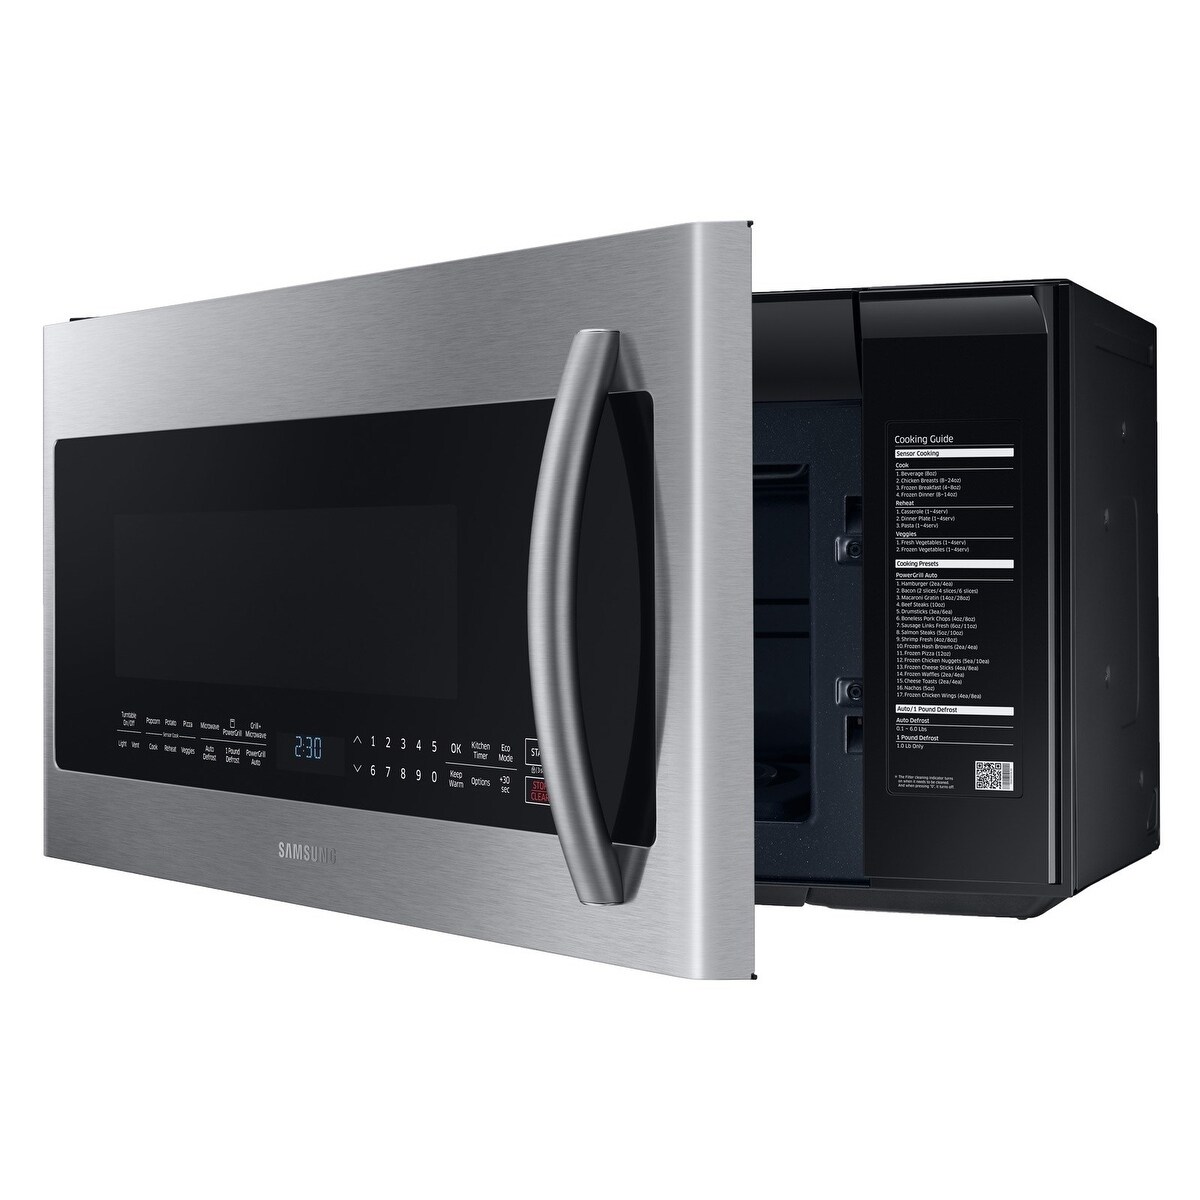 https://ak1.ostkcdn.com/images/products/27158721/Samsung-2.1-cu.-ft.-Over-The-Range-Microwave-with-PowerGrill-and-Ceramic-Enamel-Interior-af9b11b0-f064-4cdb-95a6-e4743e898bc3.jpg